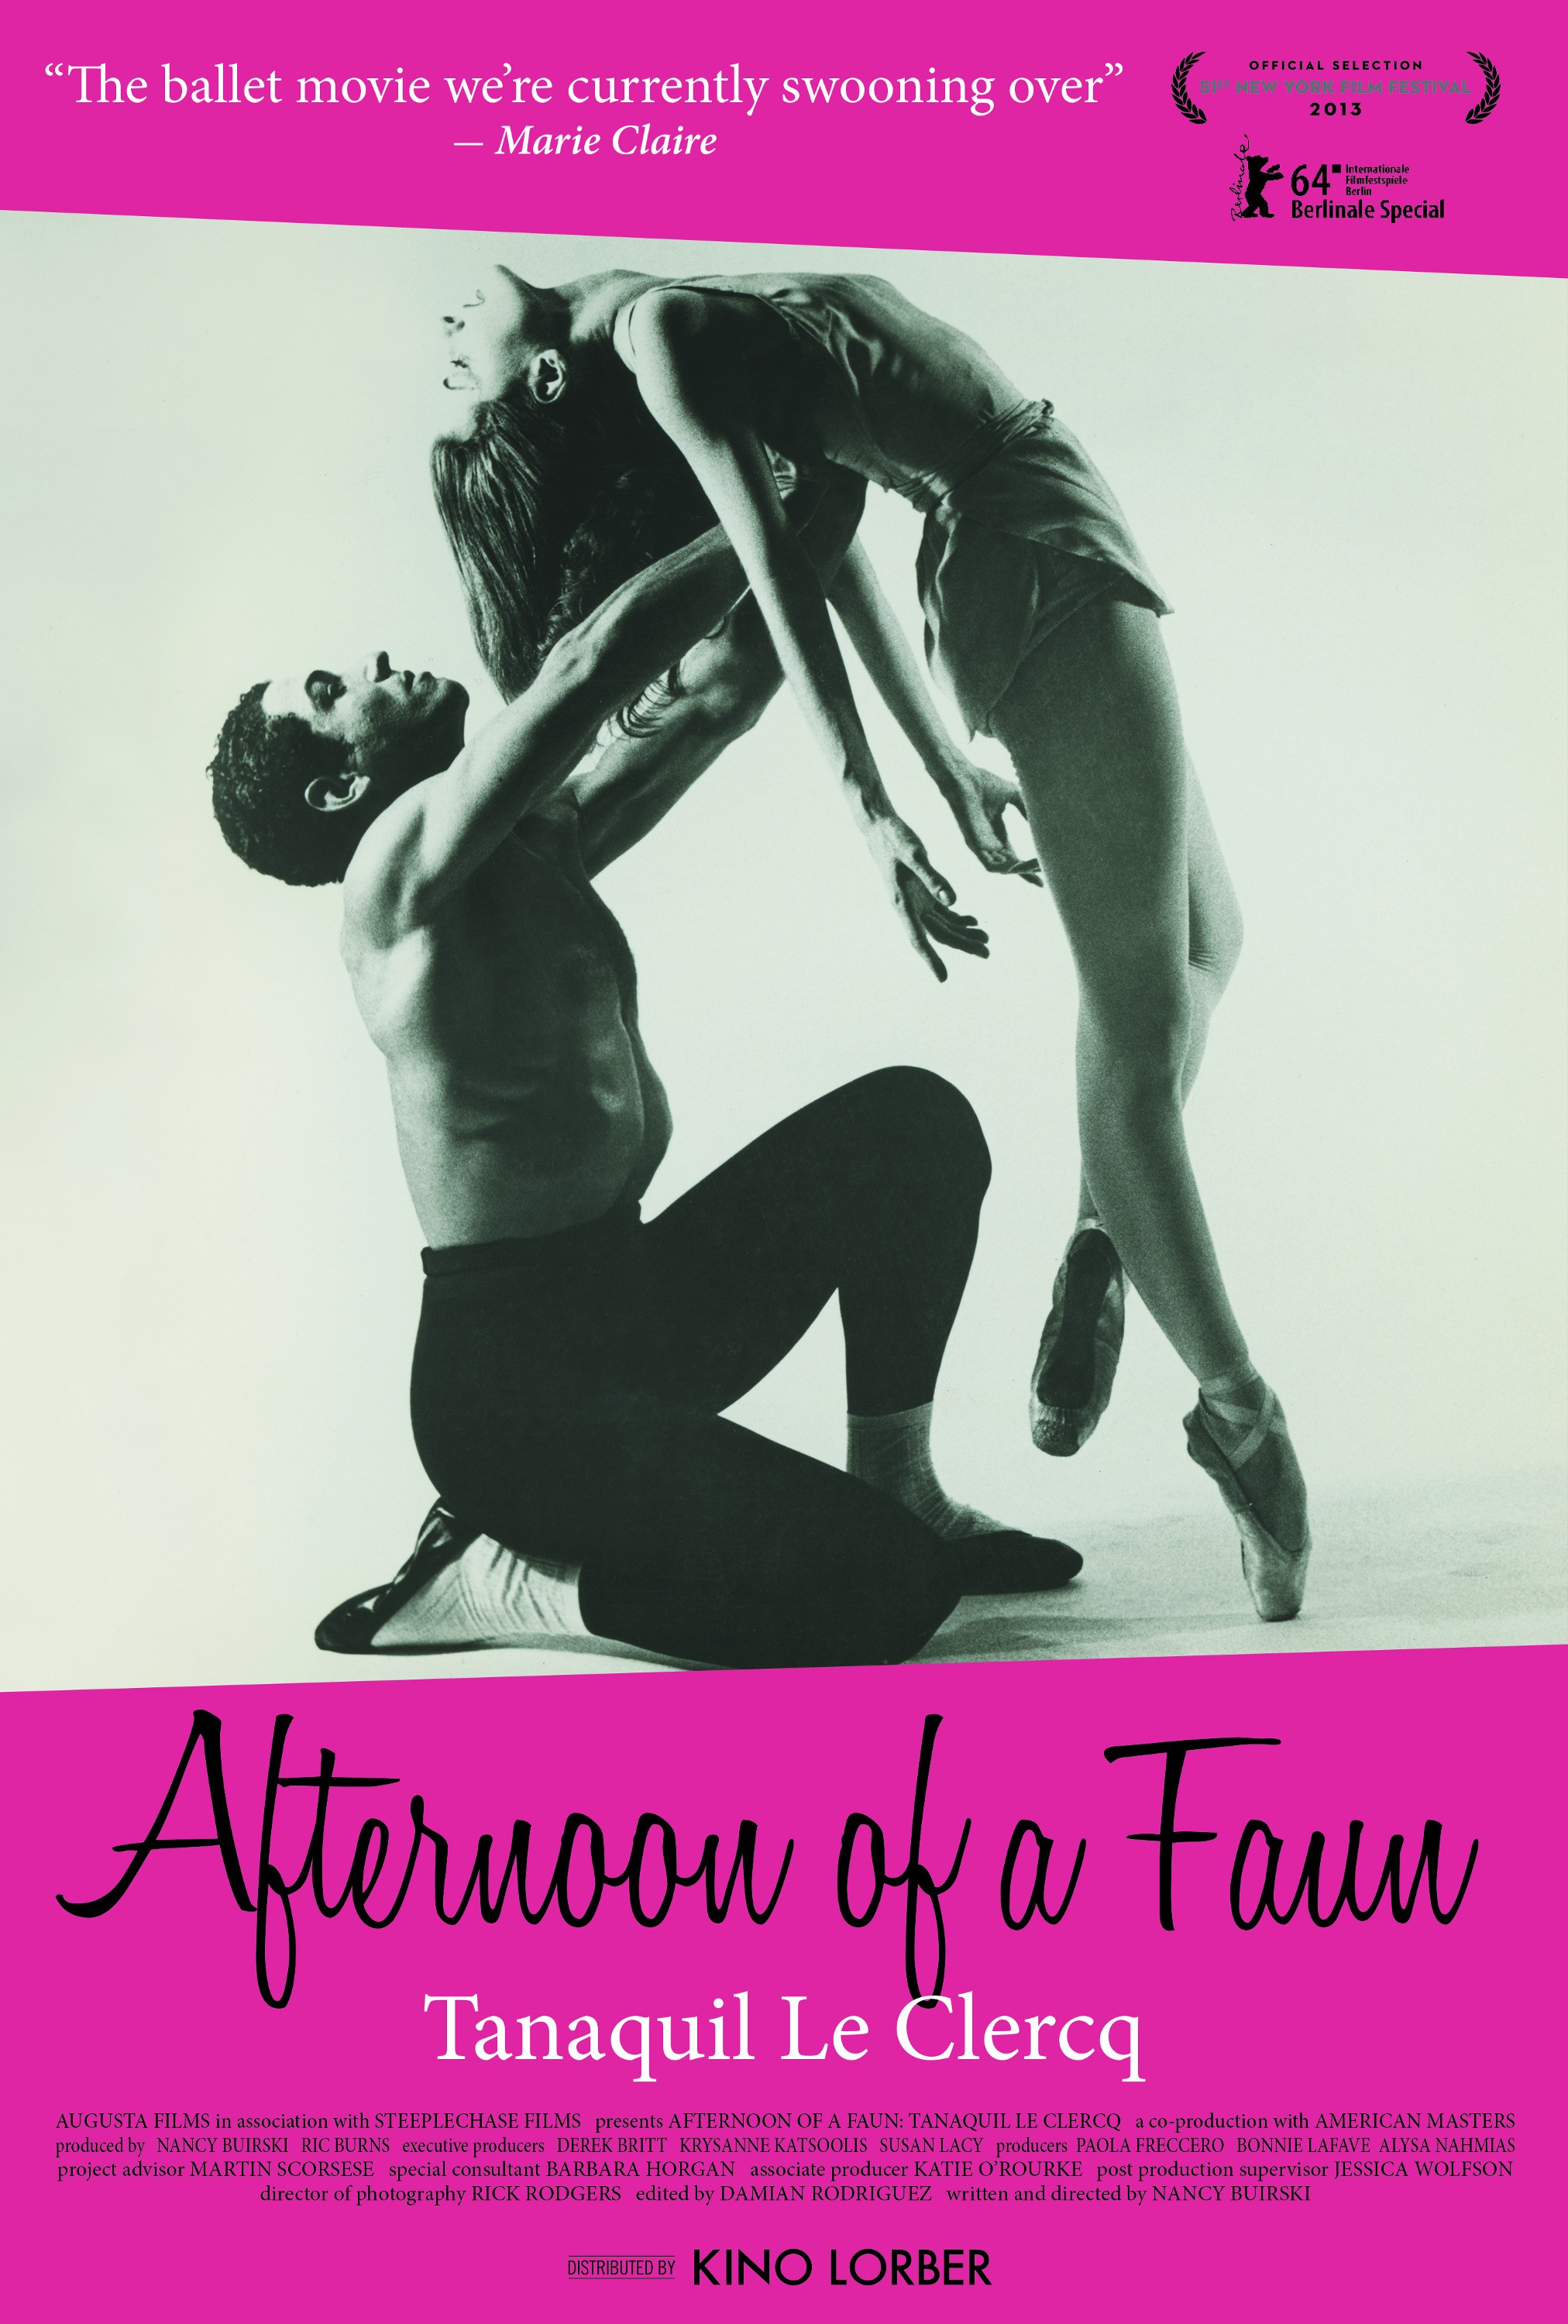 Mega Sized Movie Poster Image for Afternoon of a Faun: Tanaquil Le Clercq 